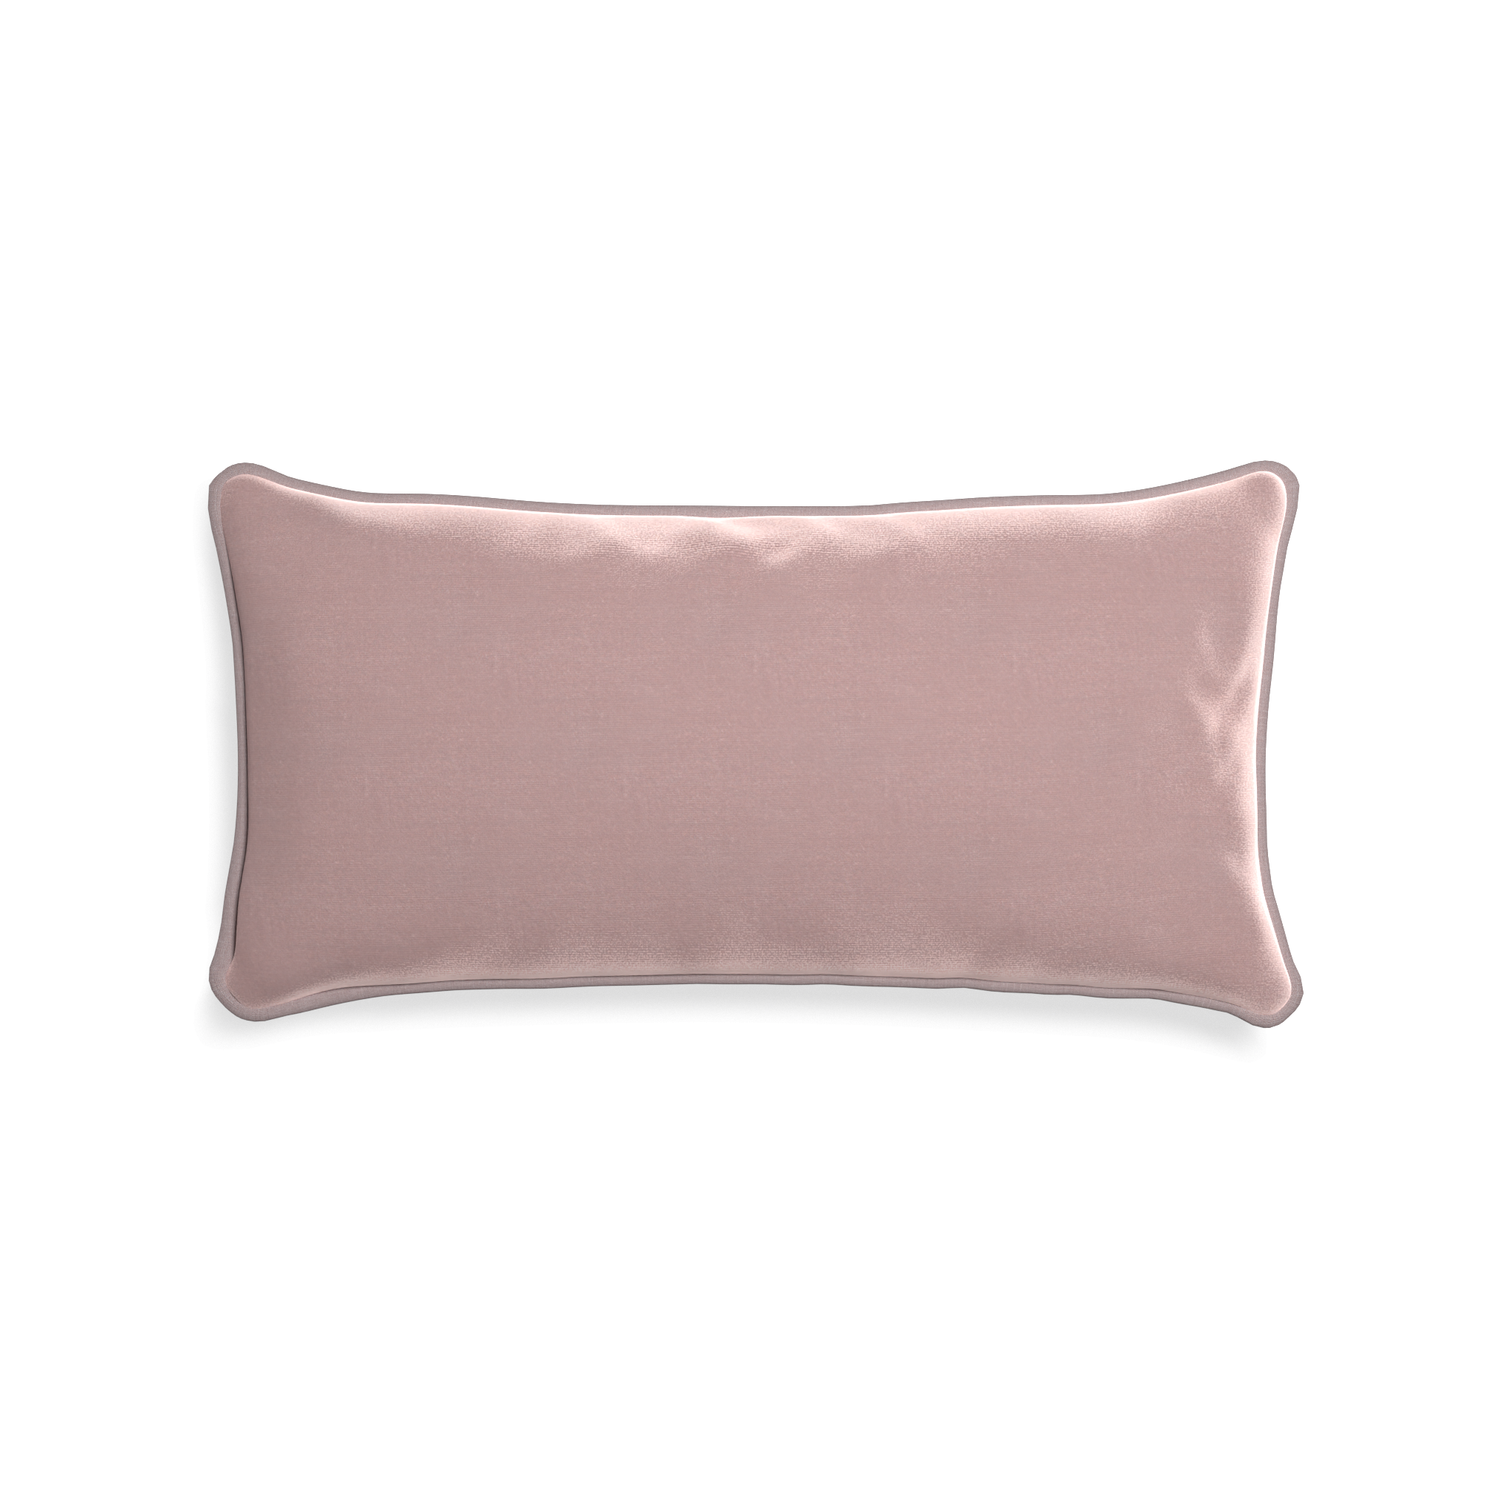 Midi-lumbar mauve velvet custom mauvepillow with orchid piping on white background